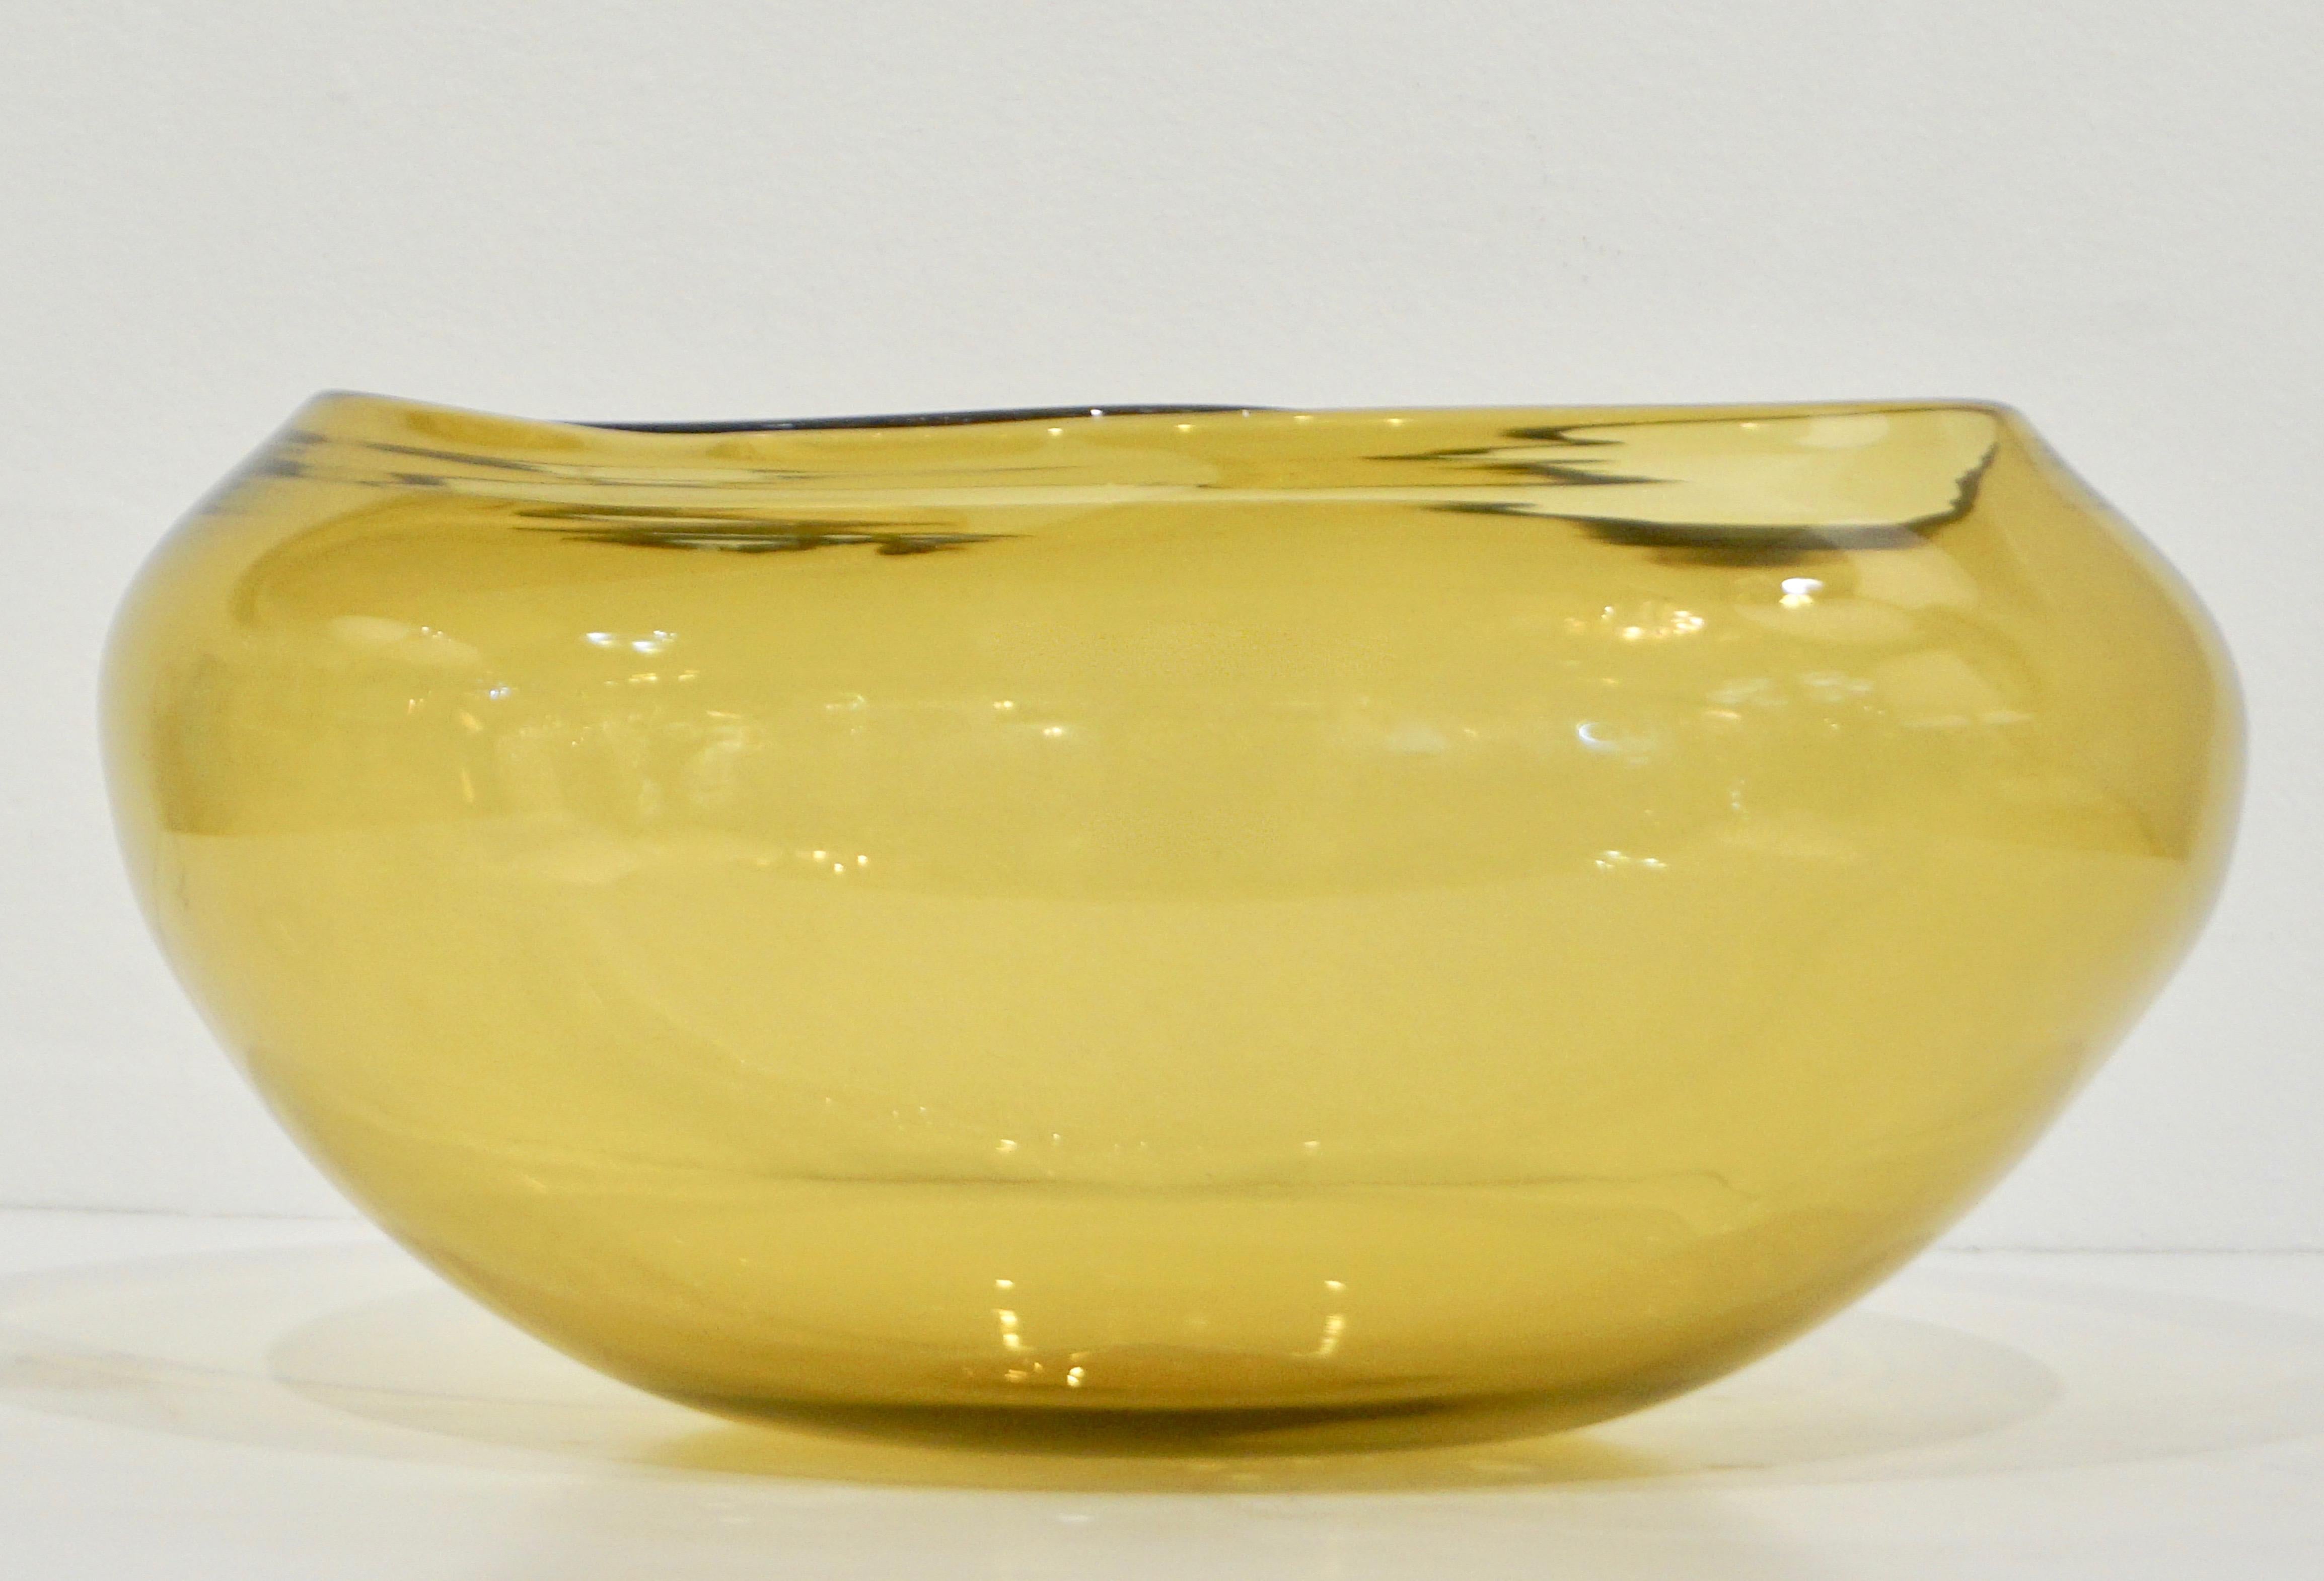 A minimalist yet sophisticated blown Murano glass vessel by Salviati in warm honey amber color, of organic modern design with waved border creating an inspiring abstract shape. Signed piece.

Can be accompanied by similar bowl to make a pair as per